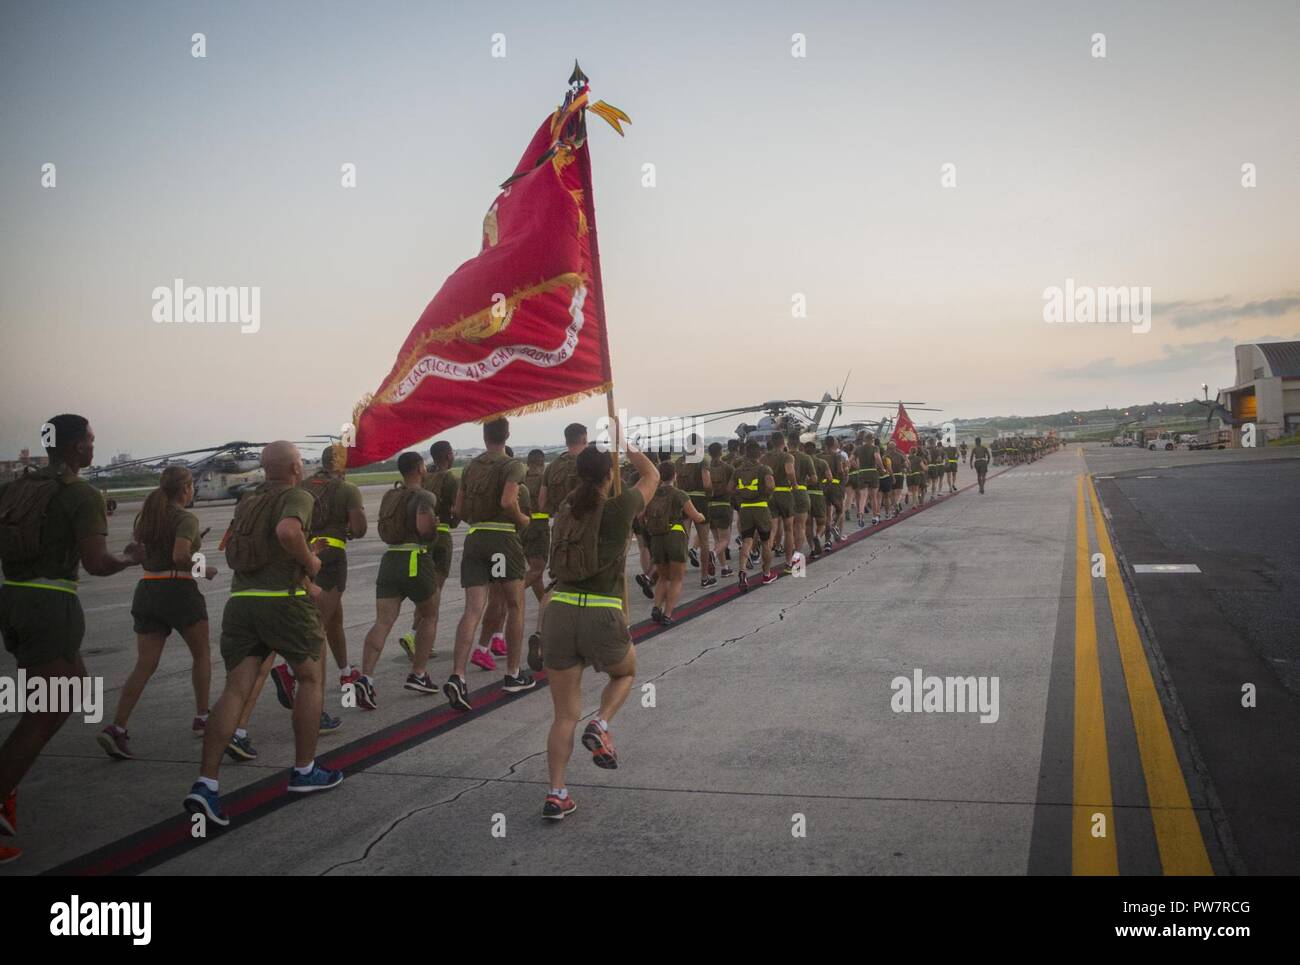 U.S. Marines with Marine Tactical Air Command Squadron 1, Marine Air Control Group 18, 1st Marine Aircraft Wing, sprint during 1st MAW’s suicide prevention and awareness run at Marine Corps Air Station Futenma, September 29, 2017. The run was held to increase awareness about suicide and highlight the resources available to help those in need. Stock Photo